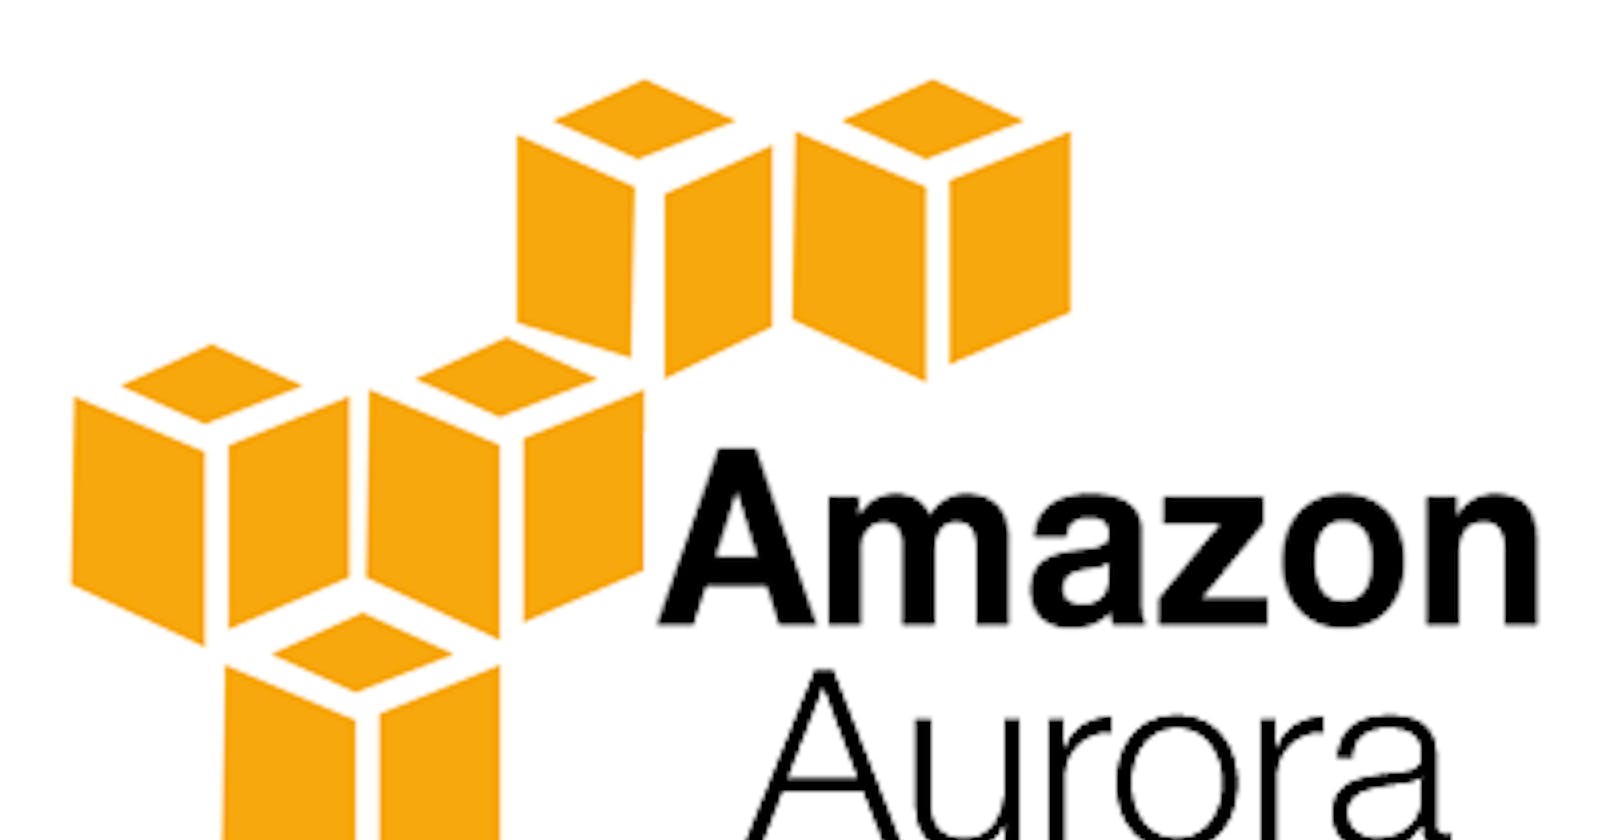 Amazon Aurora: Design Considerations for High Throughput Cloud-Native Relational Databases (Part 3)